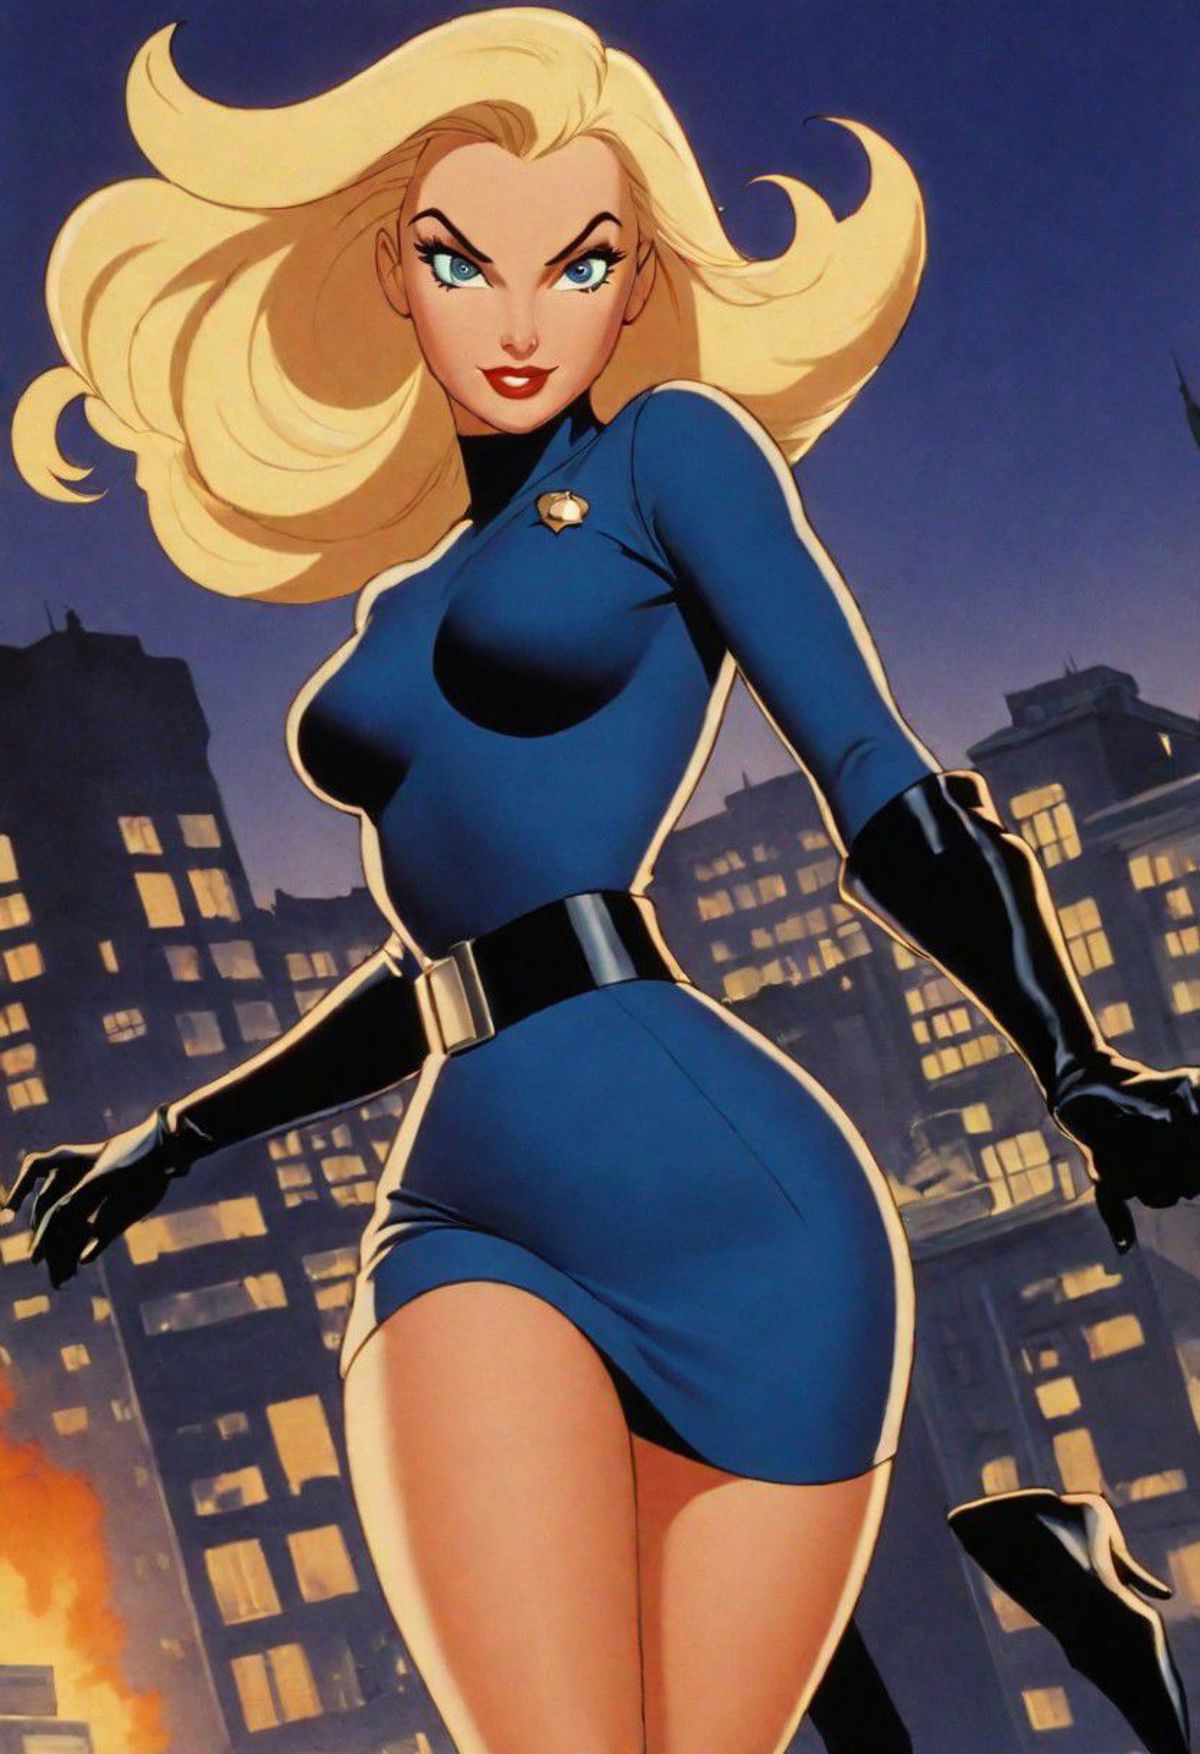 A Cartoon Blue Wigged Woman in a Blue Dress with Black Gloves and Boots.